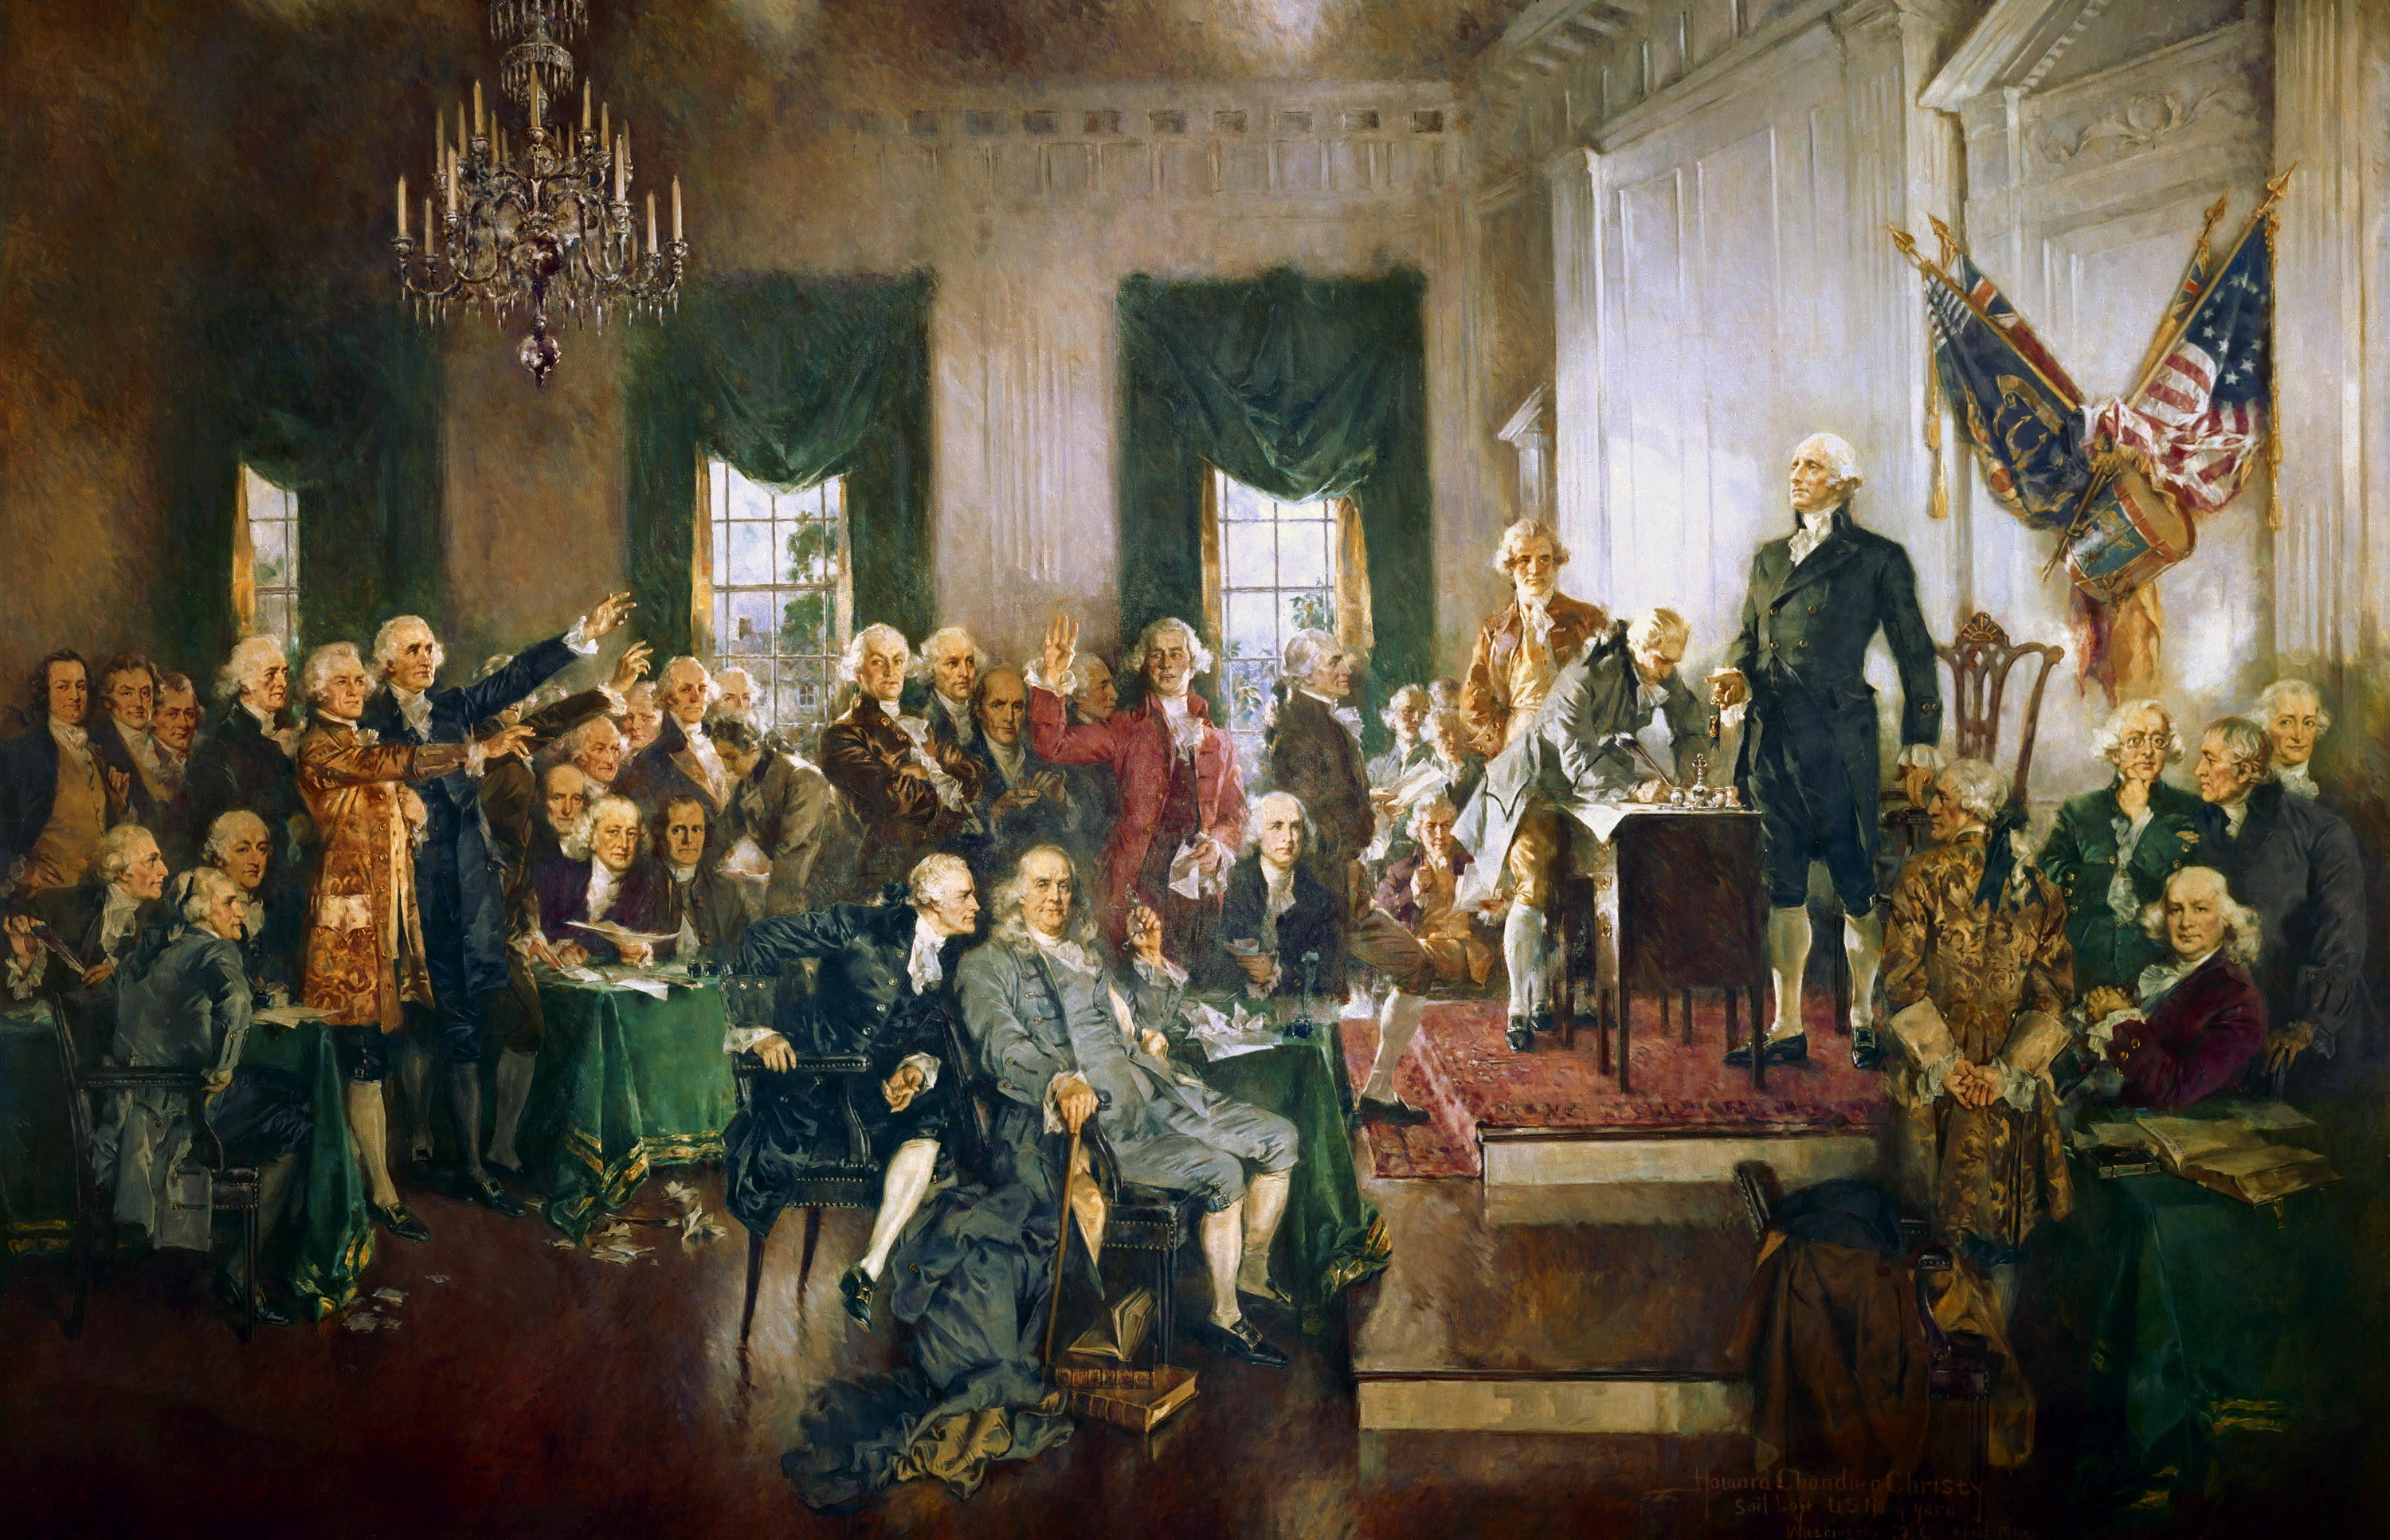 http://upload.wikimedia.org/wikipedia/commons/9/9d/Scene_at_the_Signing_of_the_Constitution_of_the_United_States.jpg